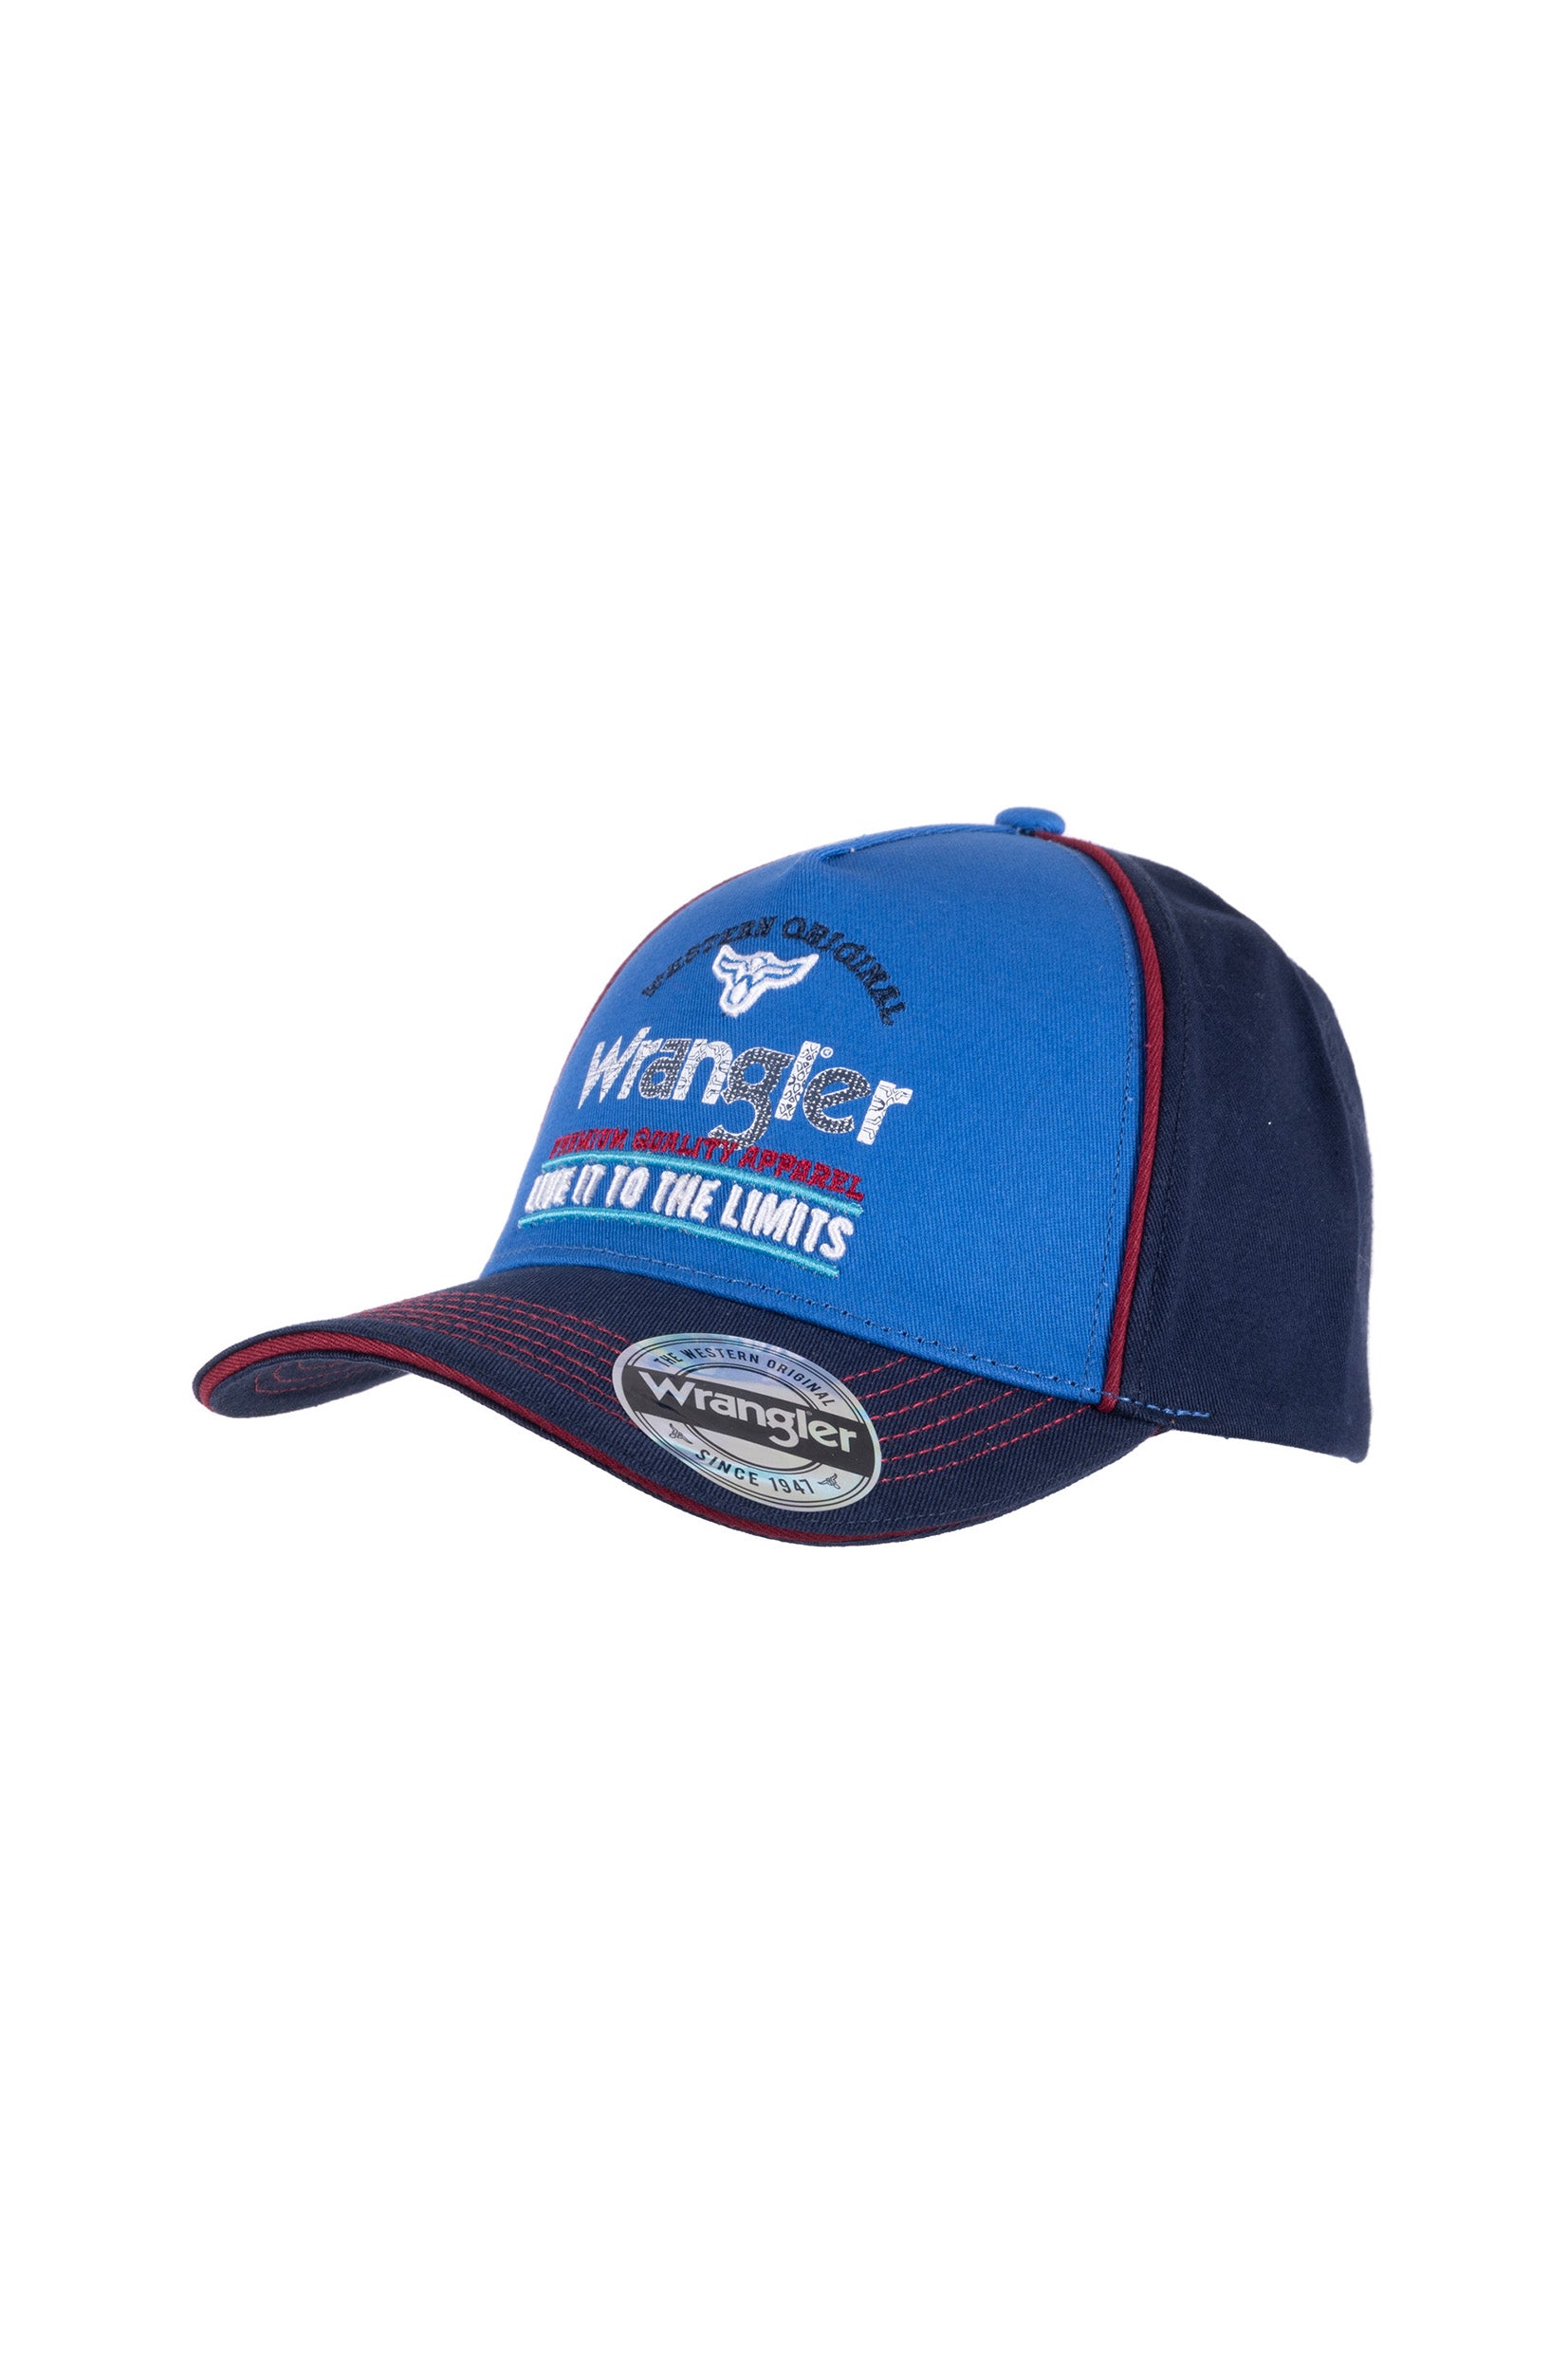 Kids Cooper Cap - The Trading Stables